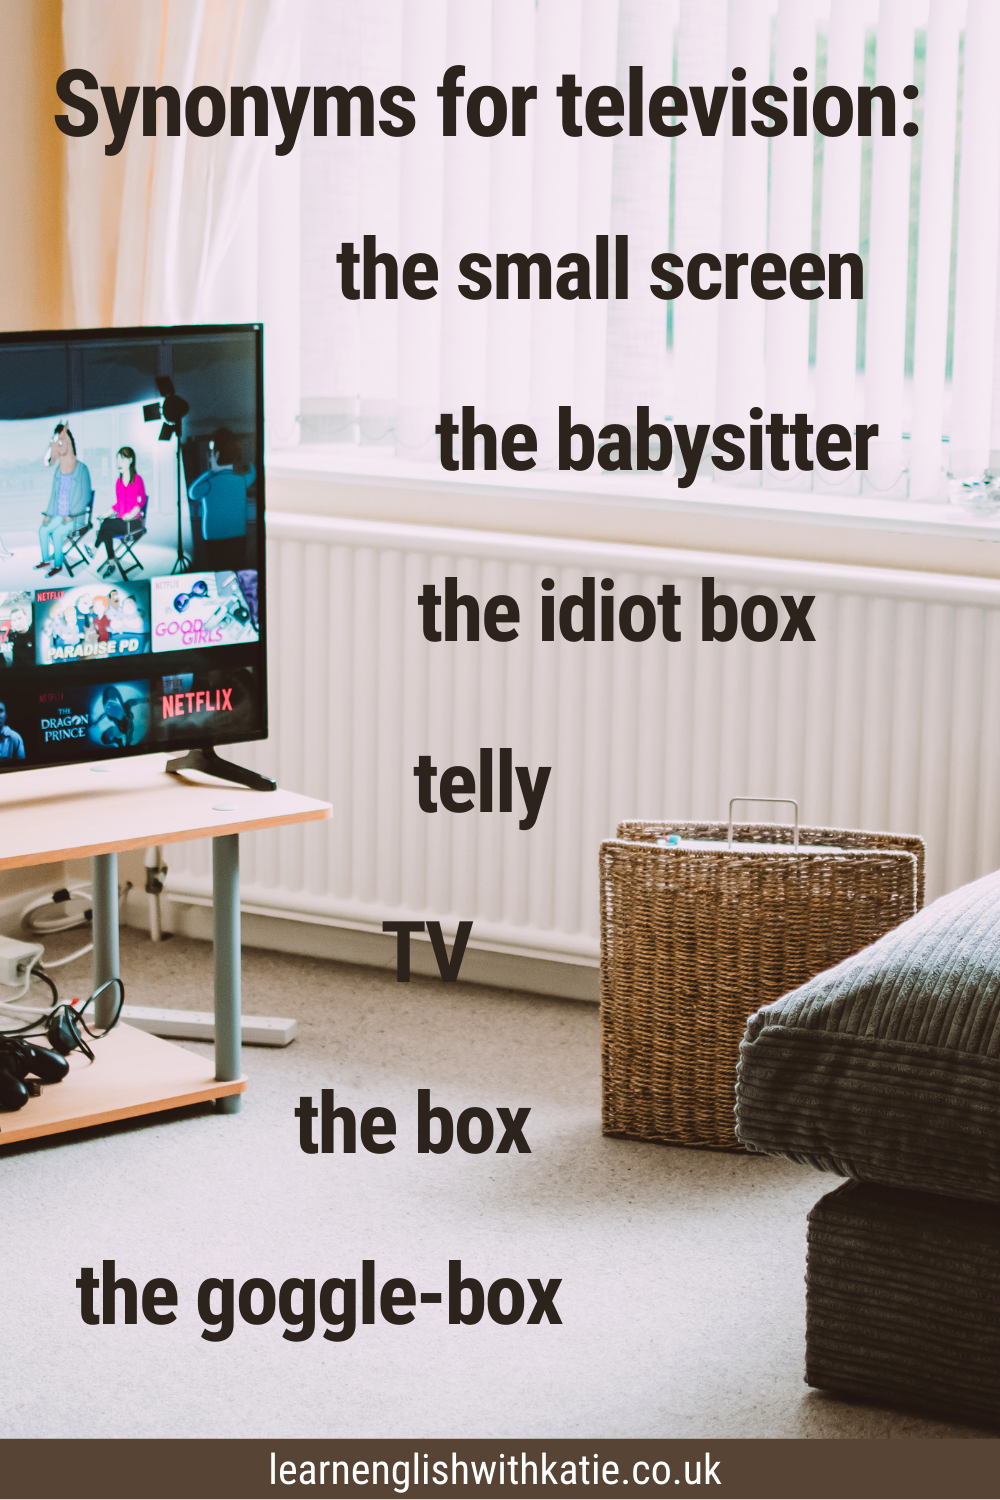 Pinterest infographic showing synonyms for TV